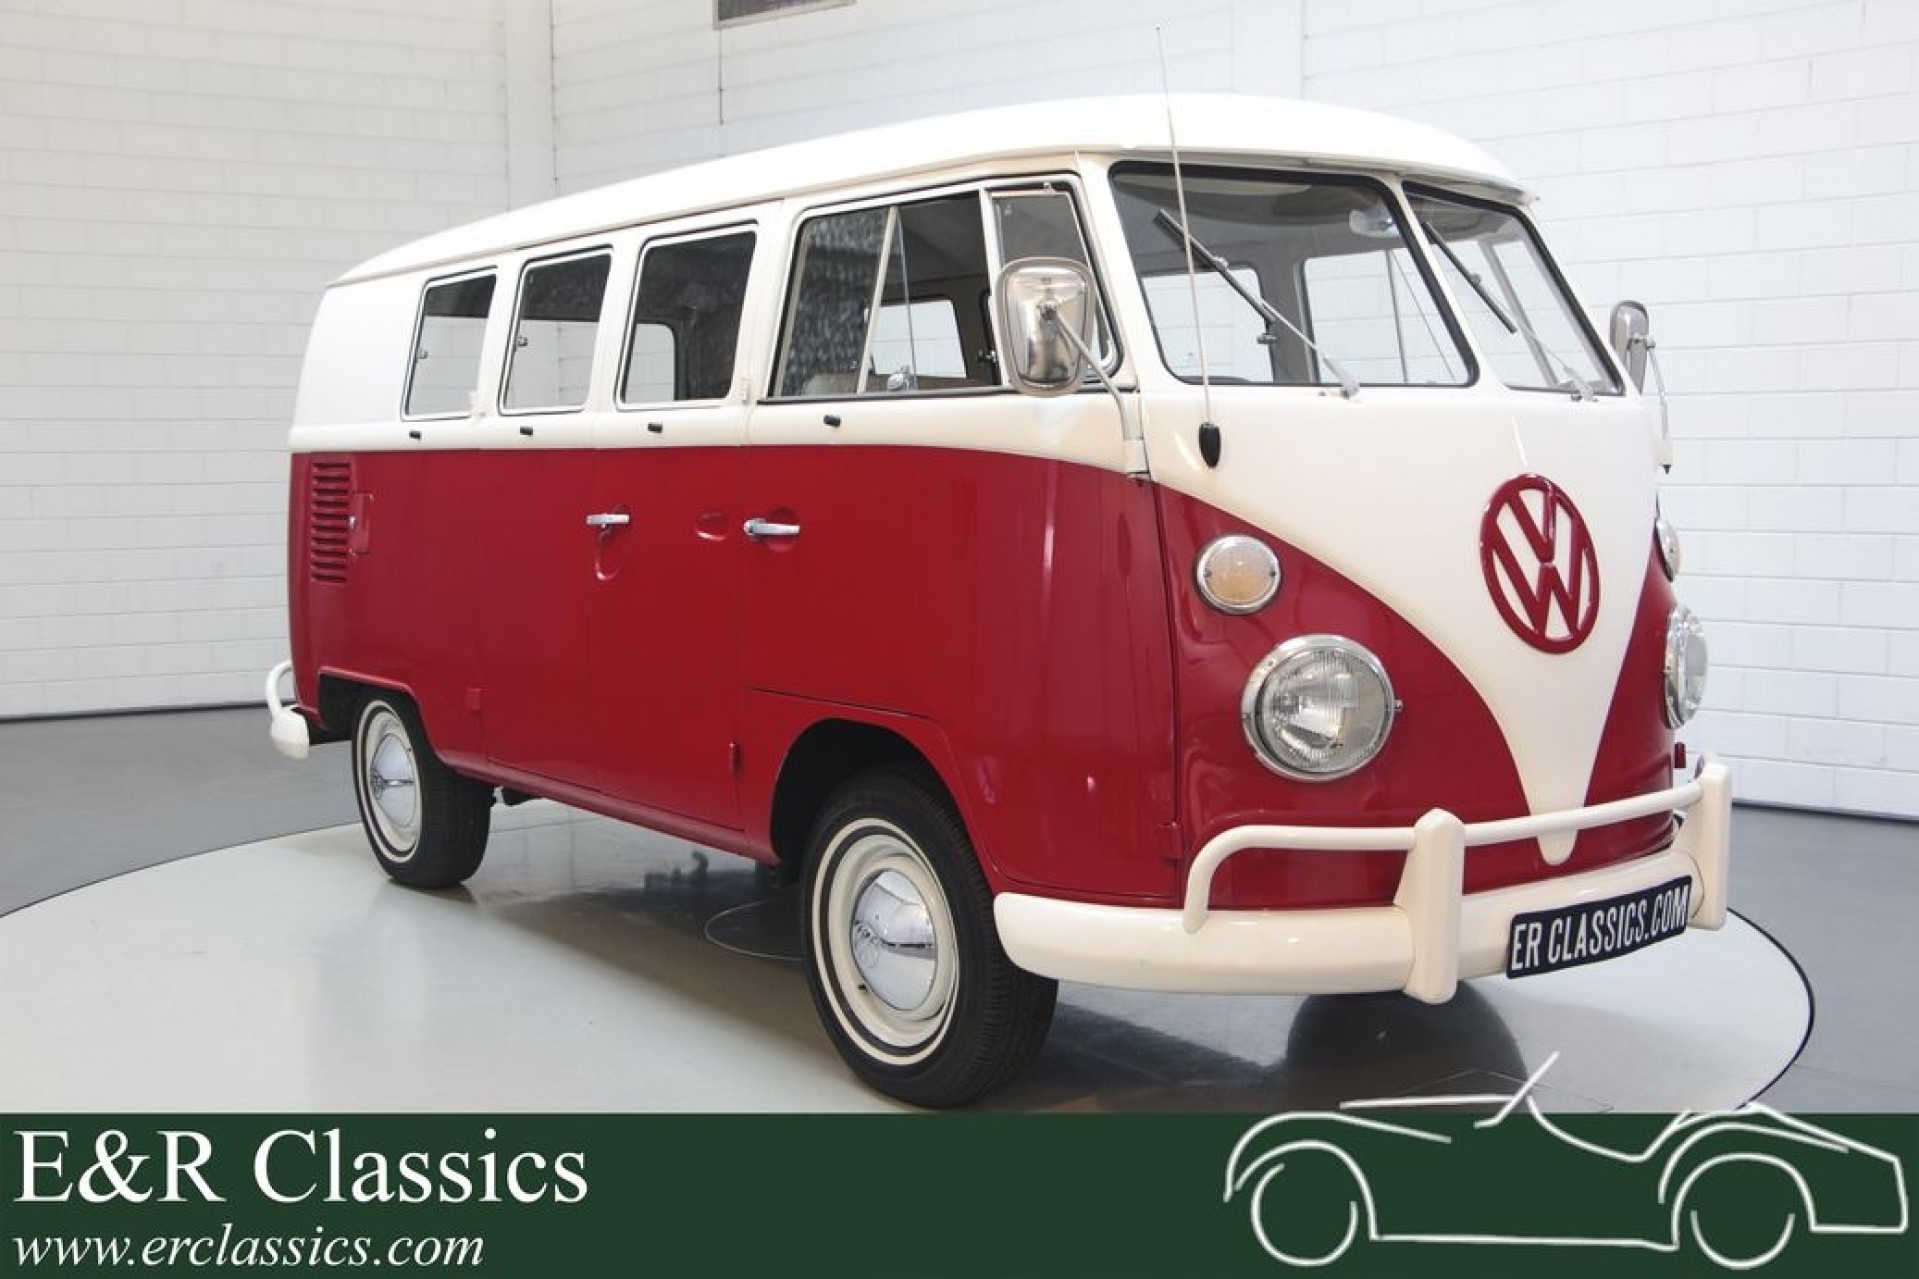 Volkswagen T1 bus for at ERclassics